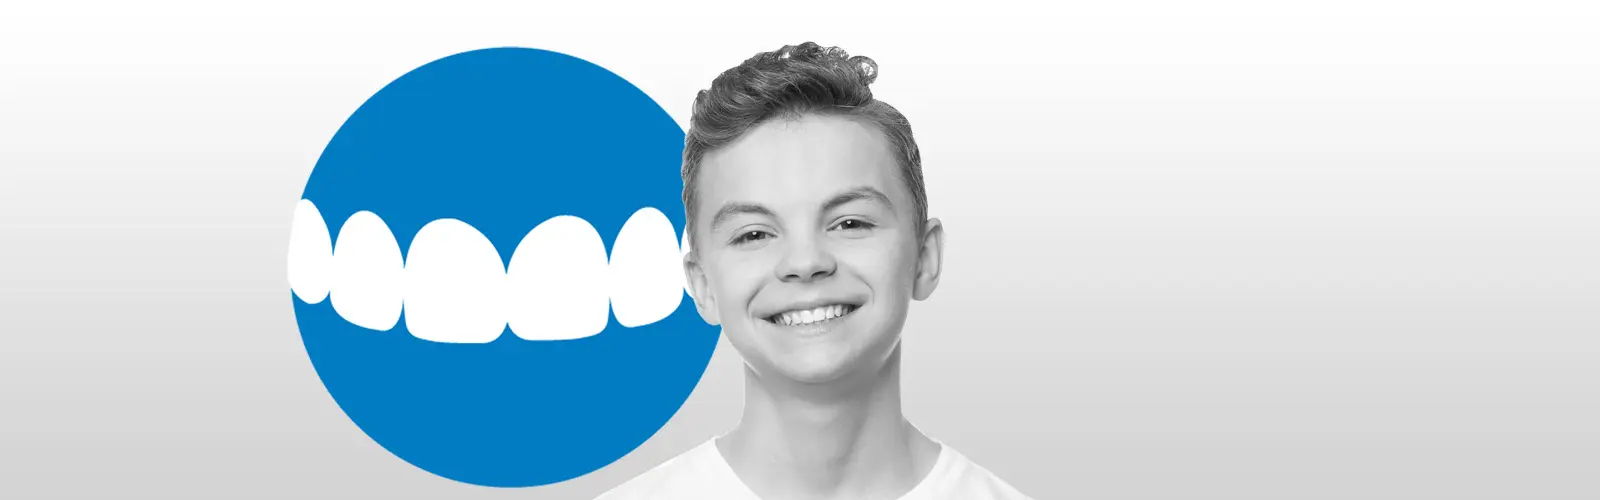 invisalign braces for kids in westchester county ny